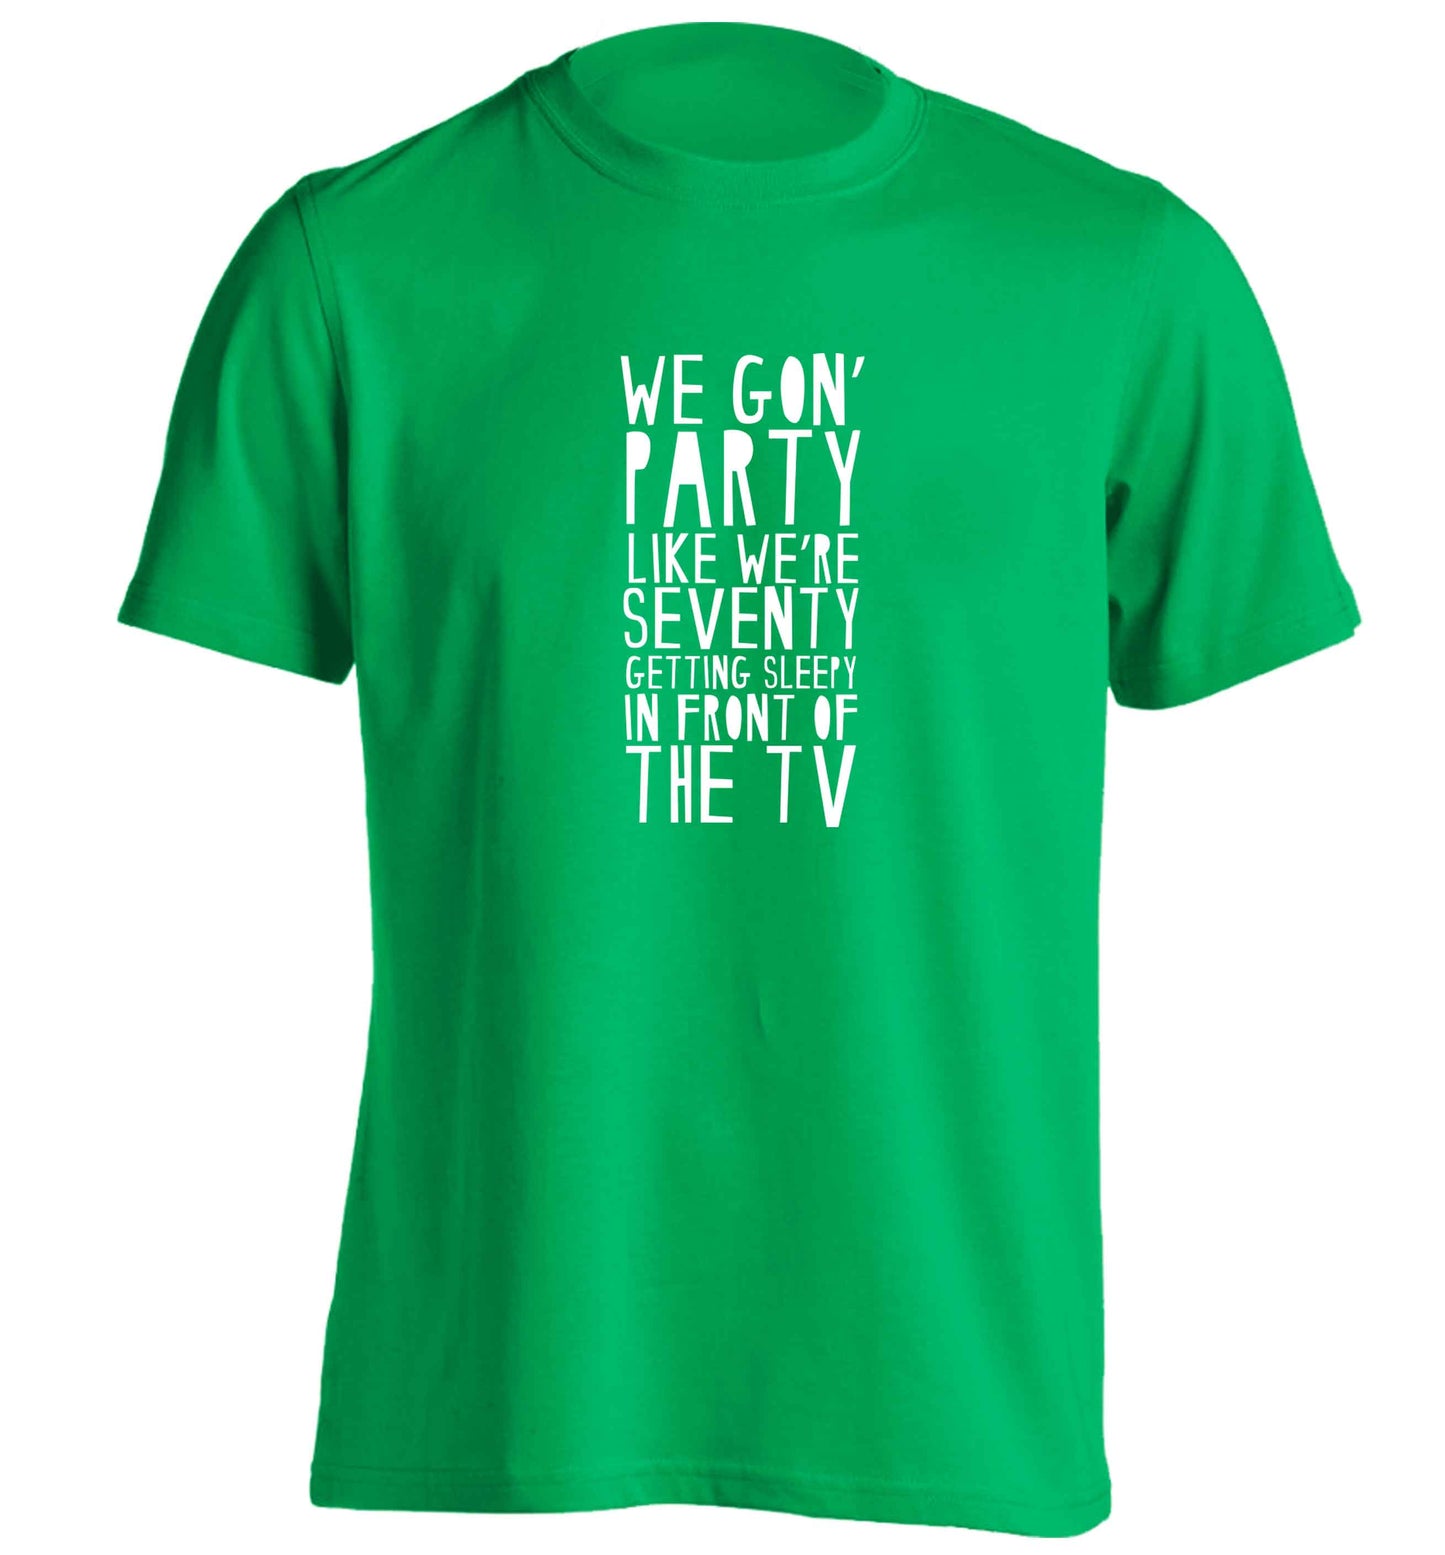 We gon' party like we're seventy getting sleepy in front of the TV adults unisex green Tshirt 2XL